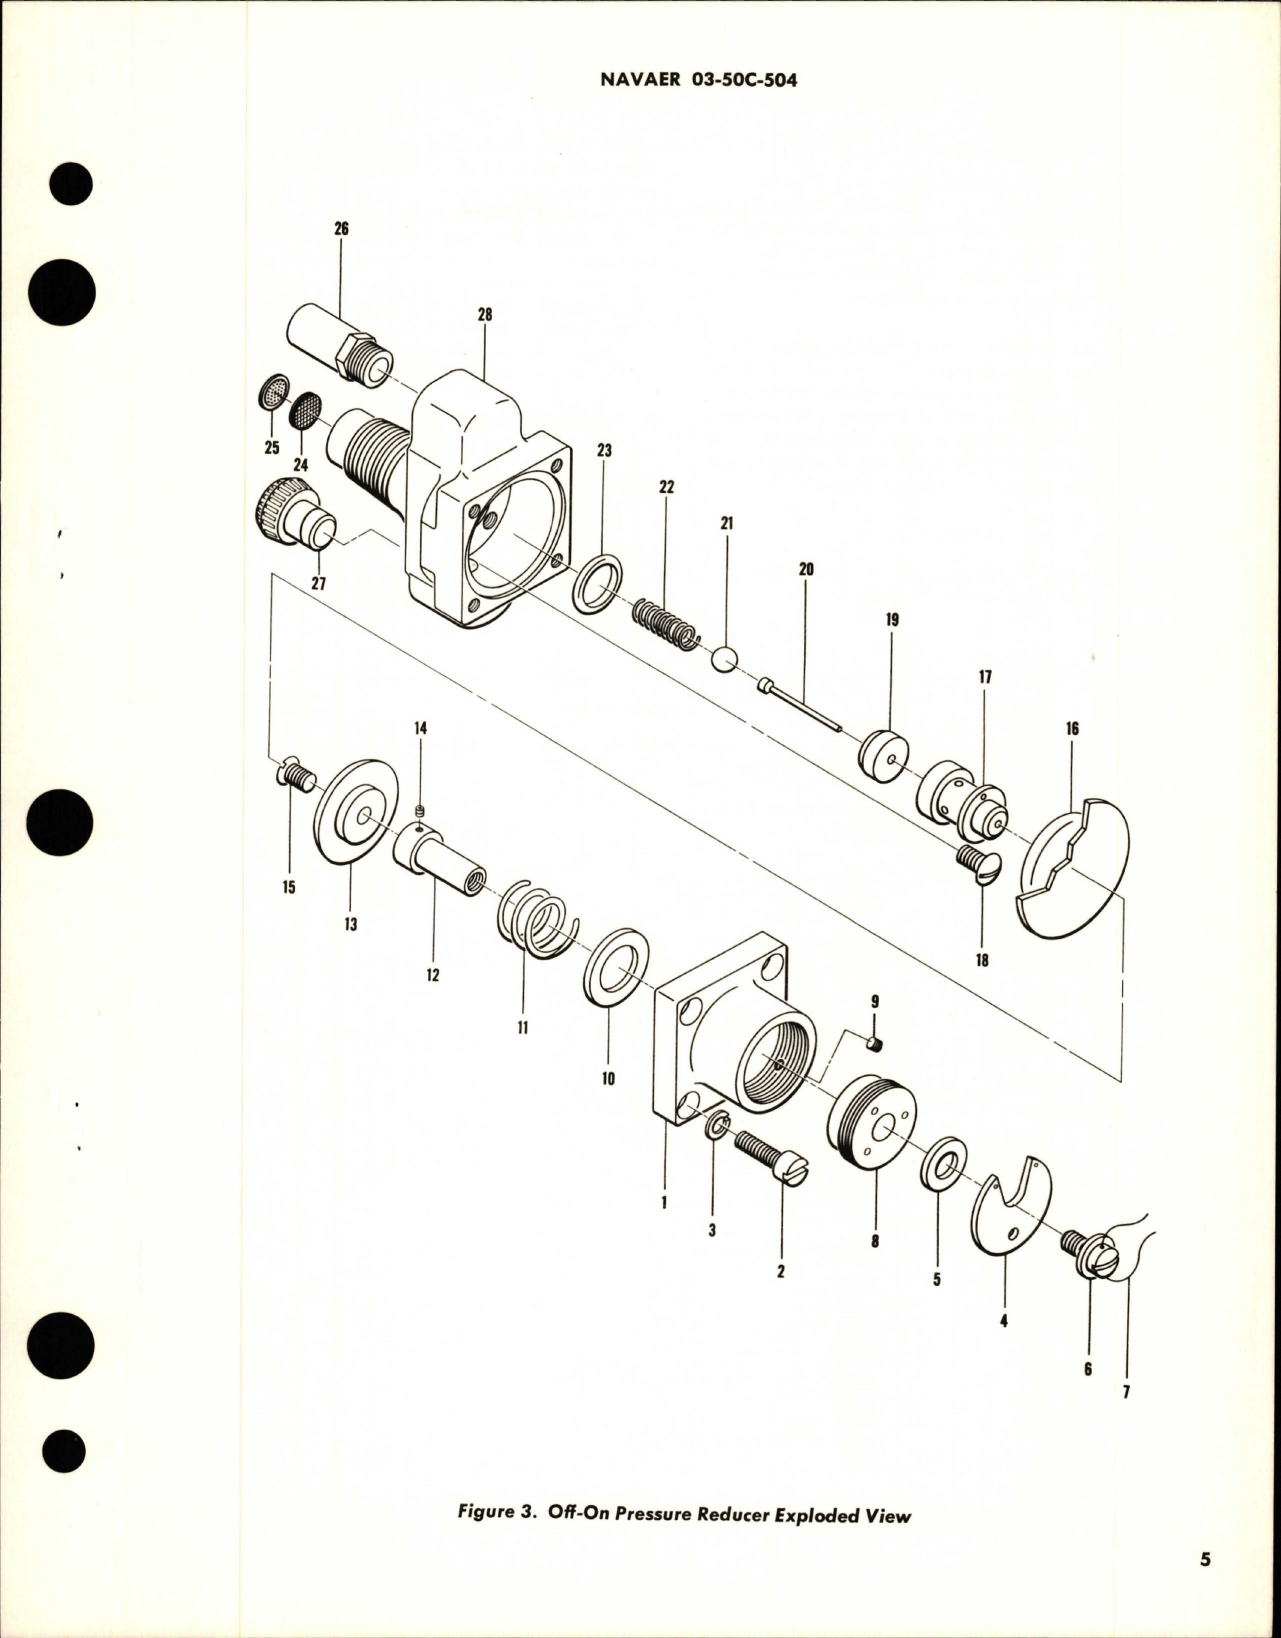 Sample page 5 from AirCorps Library document: Overhaul Instructions with Illustrated Parts Breakdown for Off-On Pressure Reducer - Part F2059